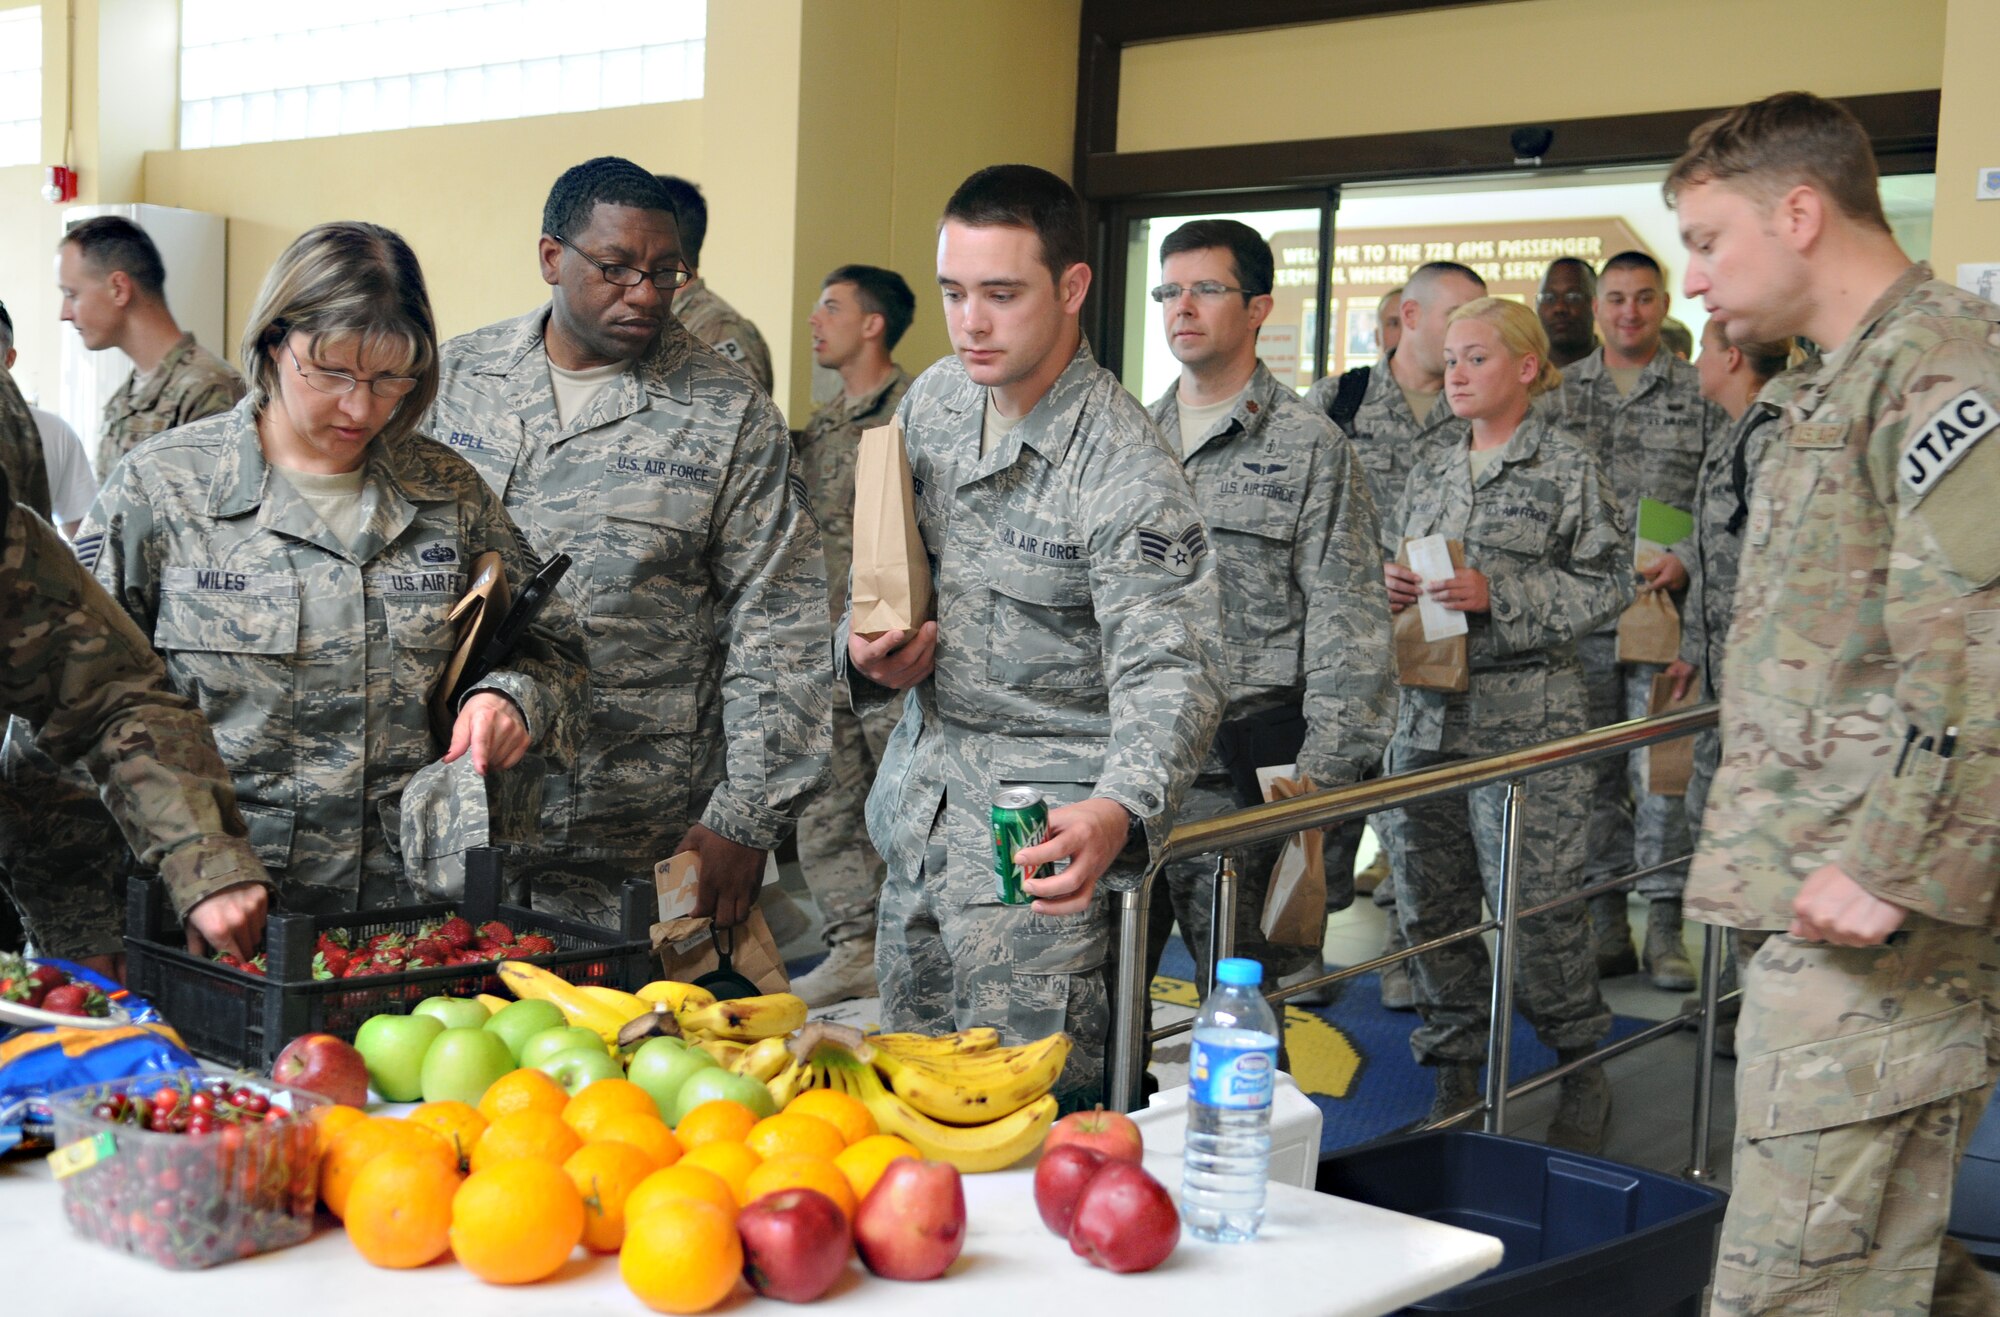 Service members returning from deployments on a layover at the Incirlik passenger terminal wait in line for fruit provided by Operation First Stop May 12, 2012 at Incirlik Air Base, Turkey. Operation First Stop is a community service project created by Incirlik Airman Leadership Class 12-D to provide snacks and drinks to redeploying service members traveling though Incirlik. (U.S. Air Force photo by Senior Airman Marissa Tucker/Released)

 